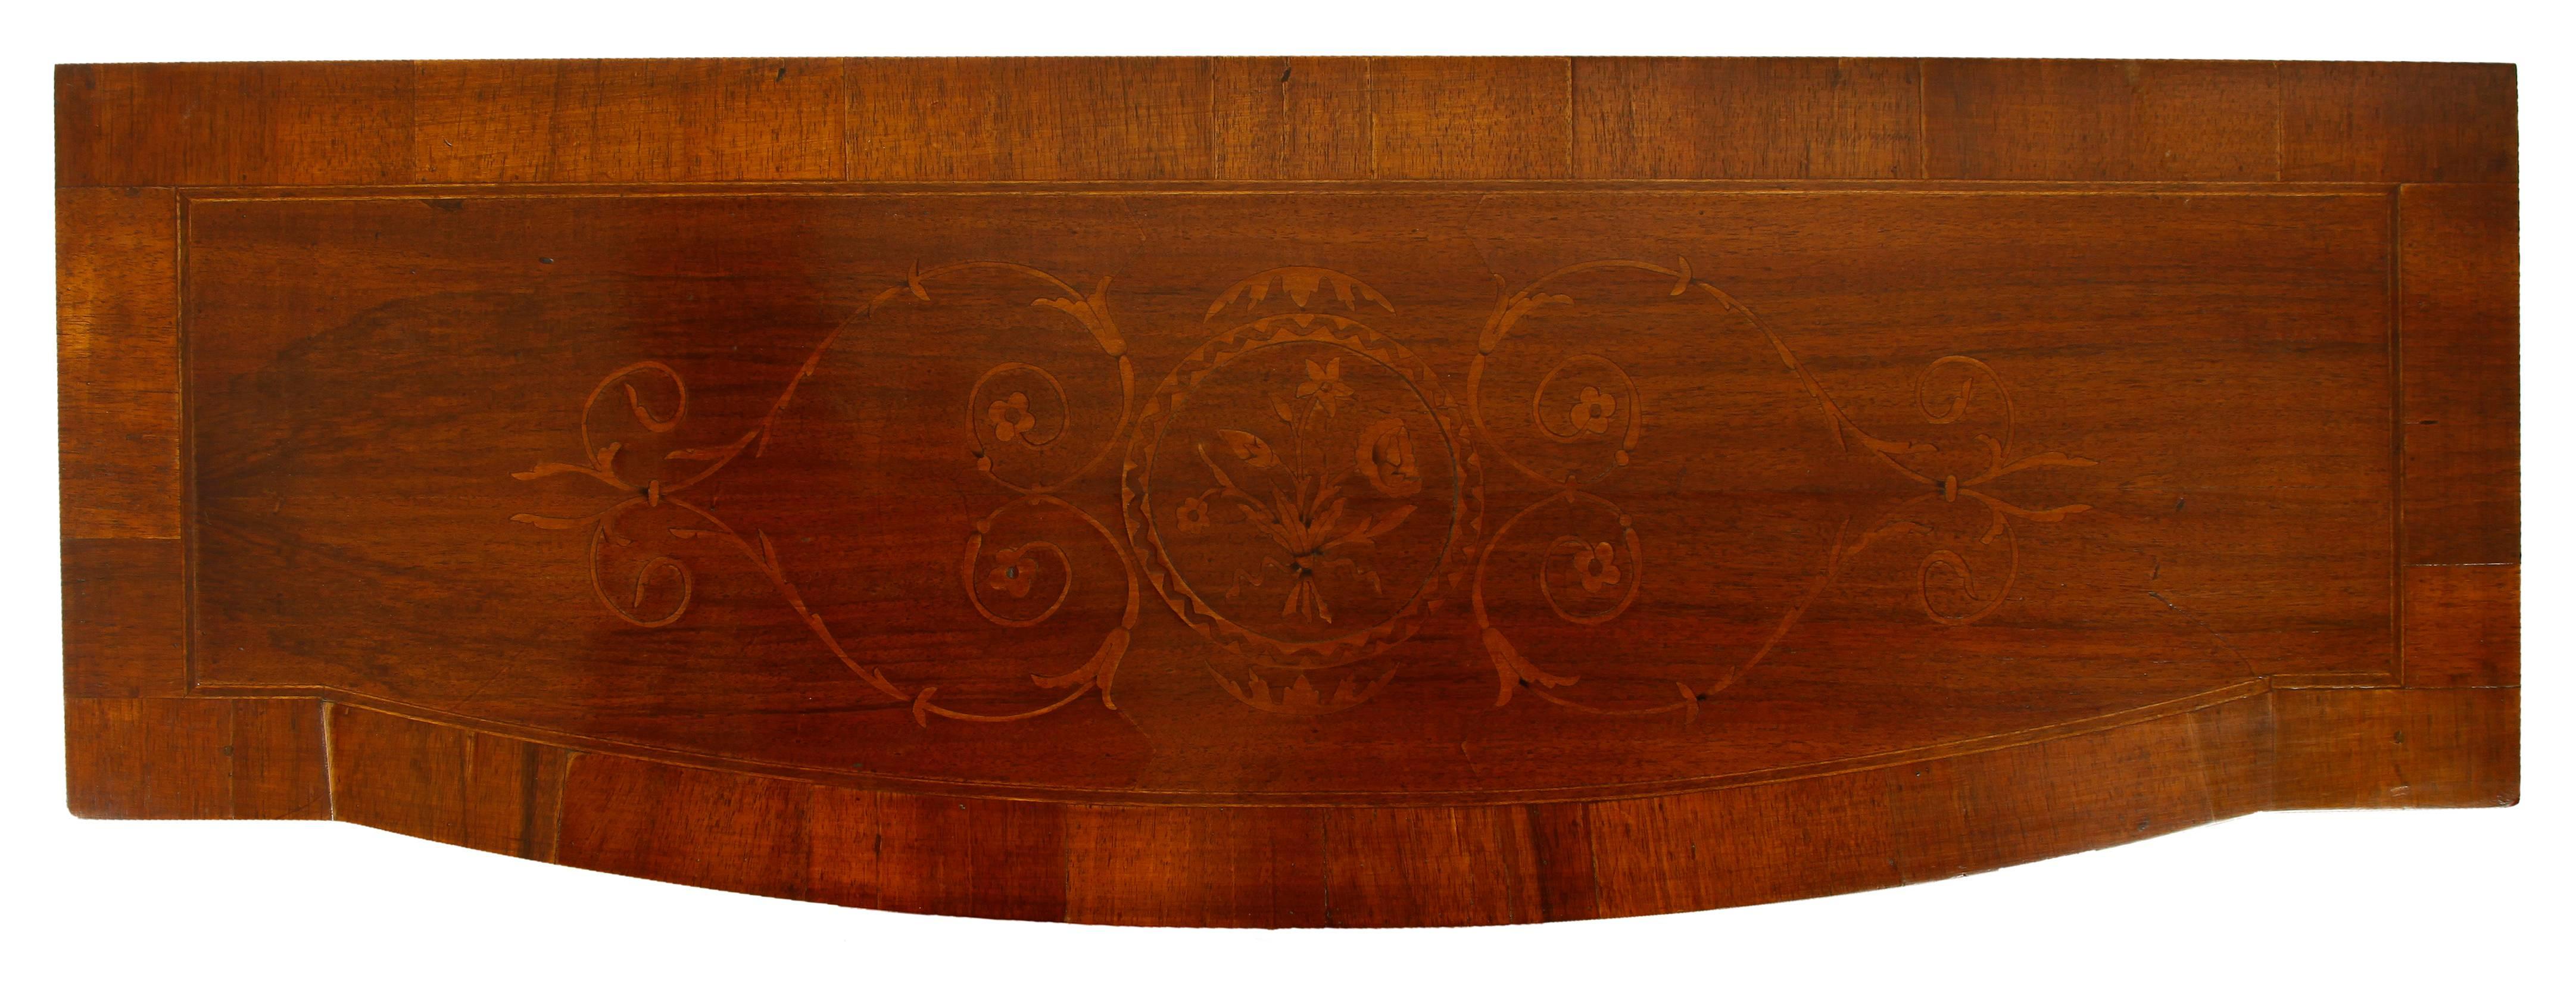 A charming Italian walnut console table with a slightly bowed front and a single drawer. This little gem features a top decorated with a crossbanding and a lovely inlaid design and is raised on squared, tapered legs. Its narrow depth makes this